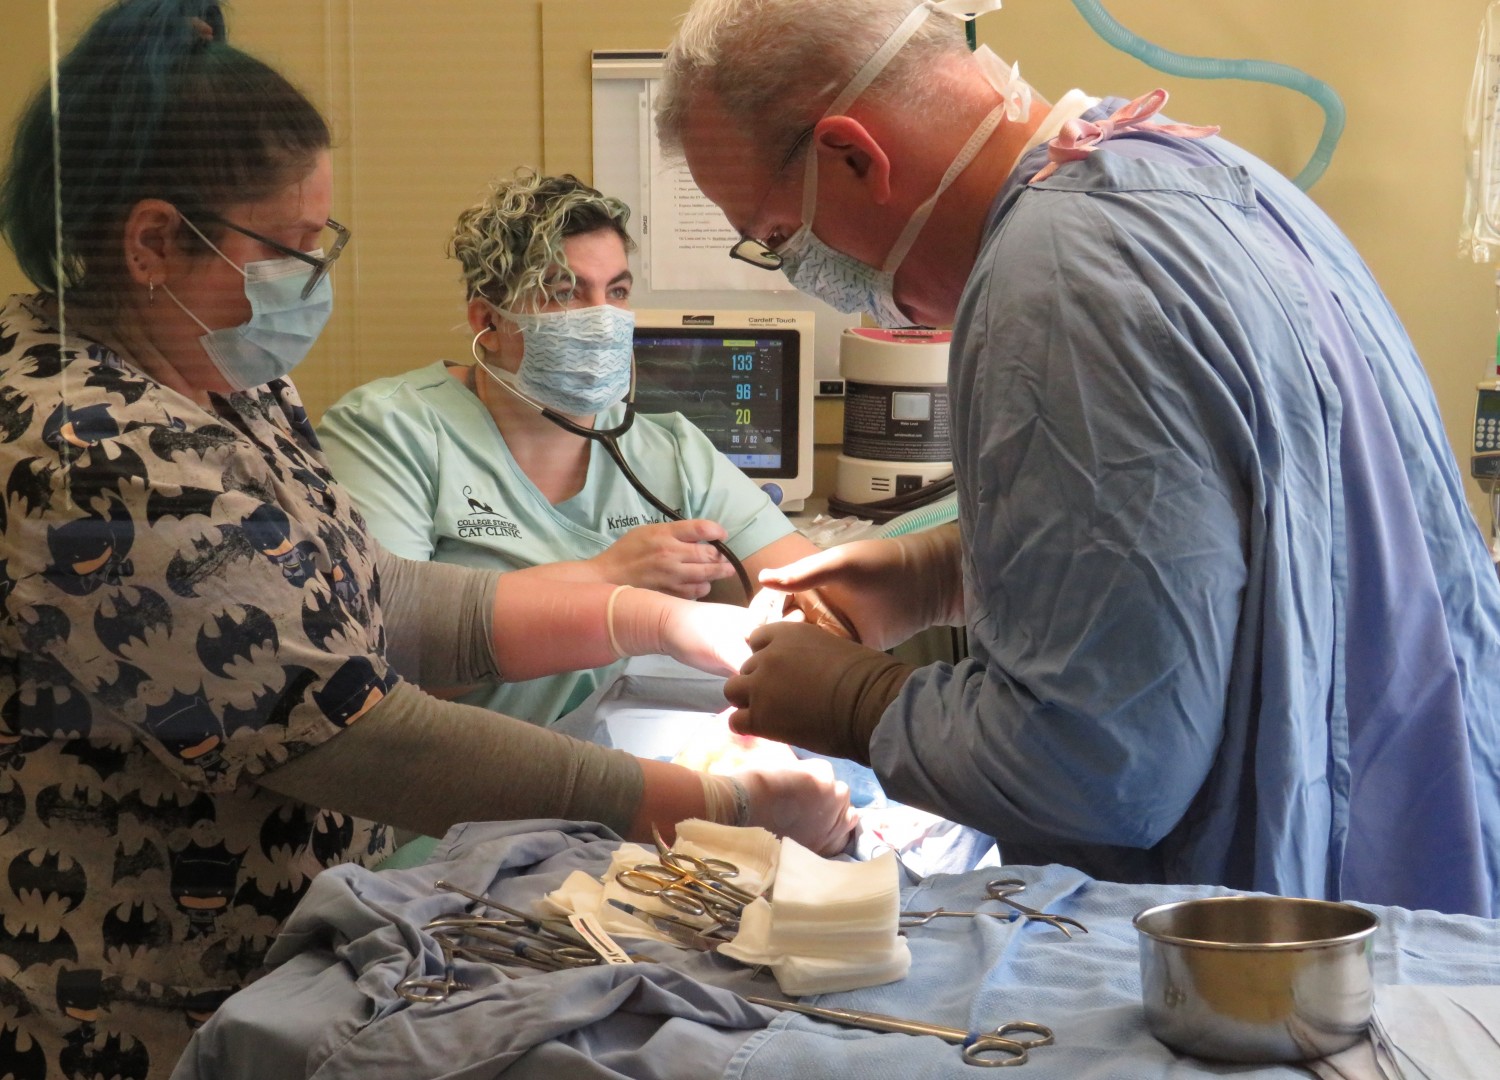 Two Technicians and Doctor performing surgery on a patient